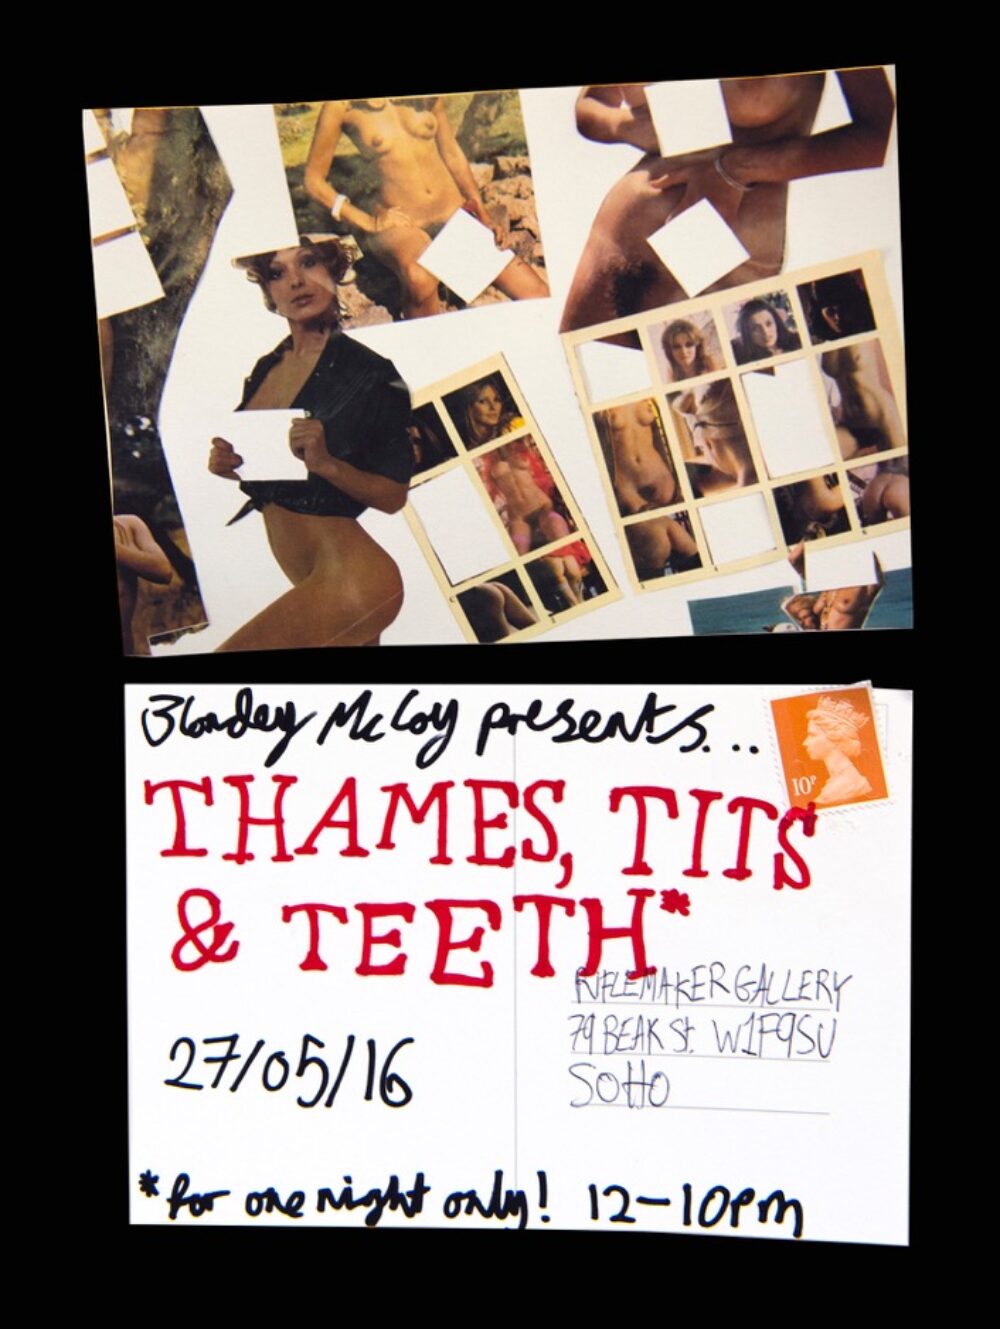 Thames-tits-and-teeth-invite